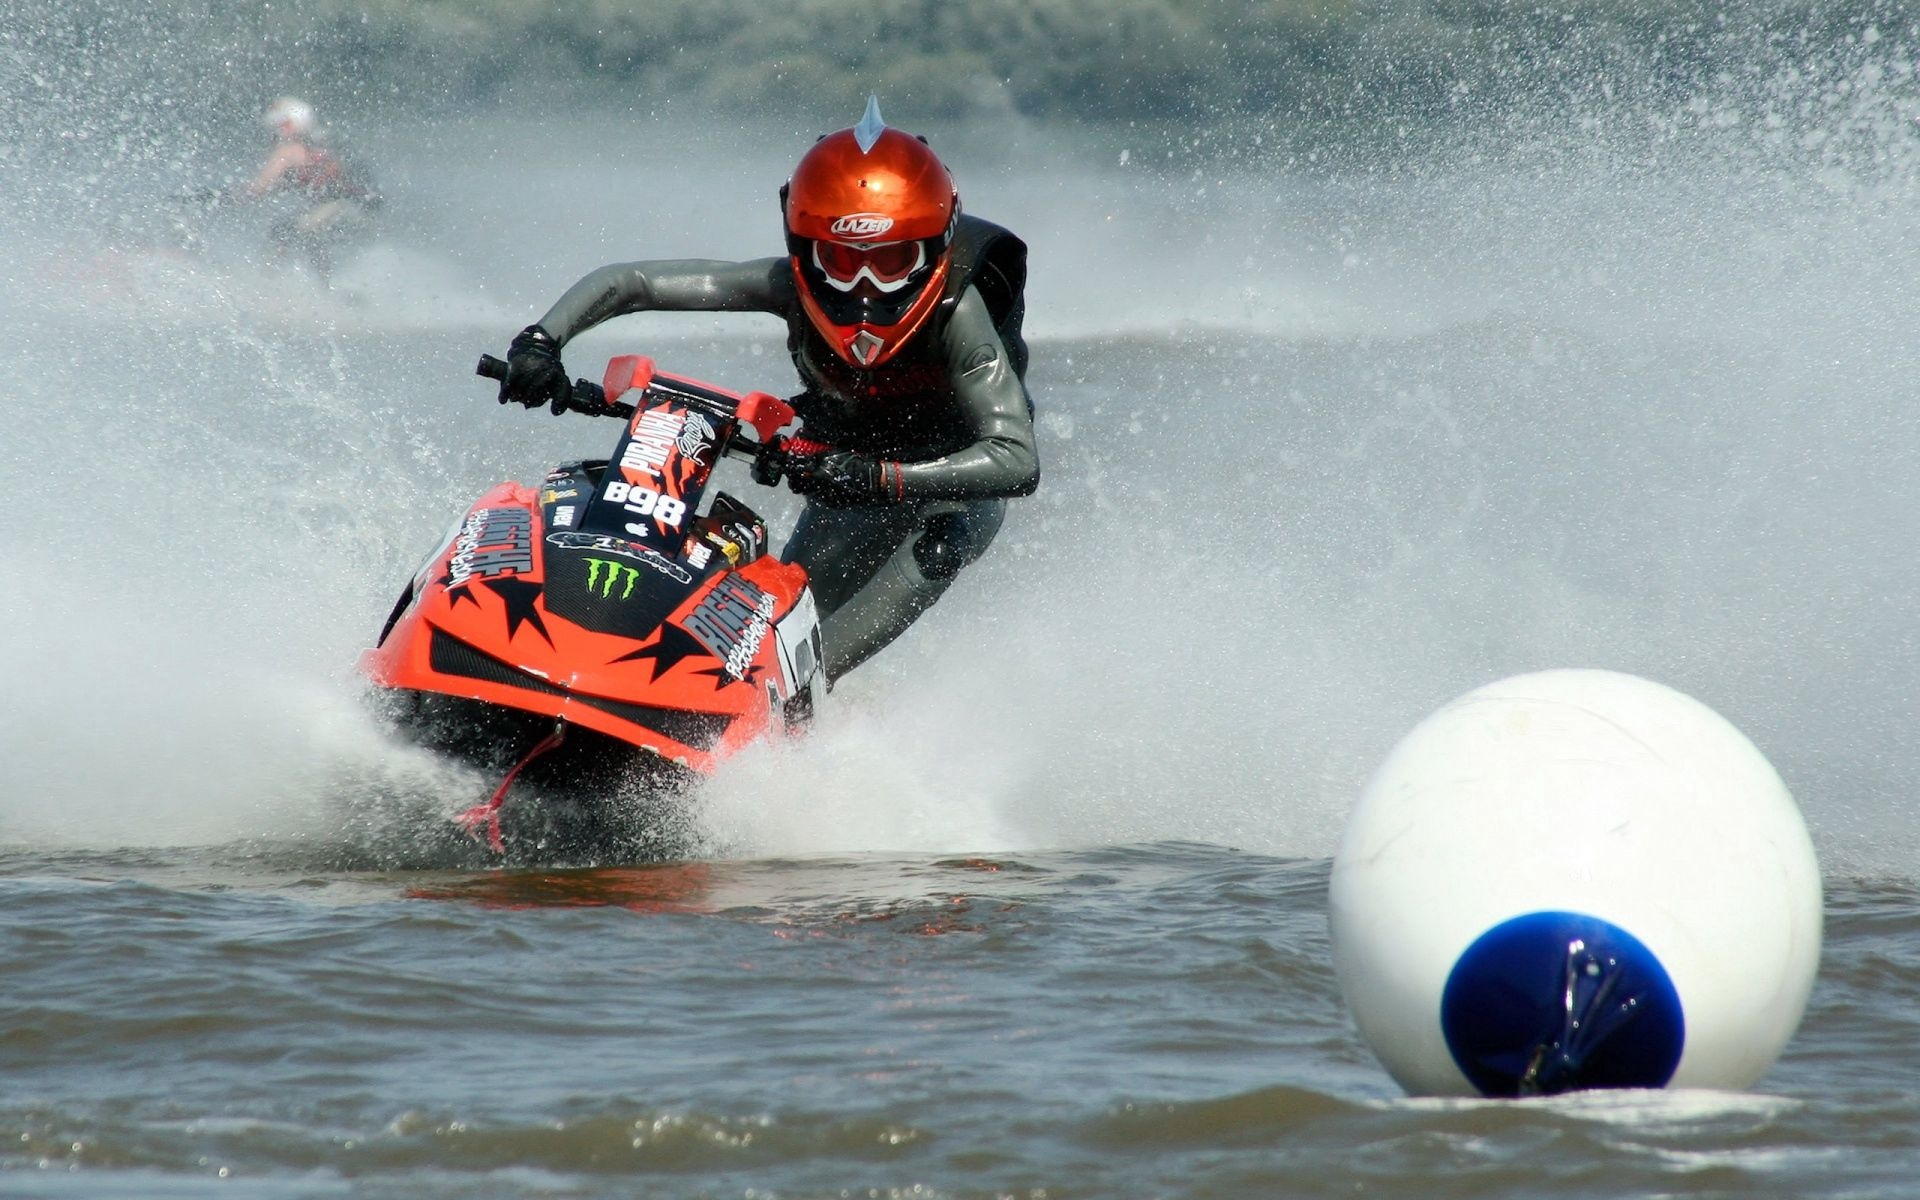 Jet ski download, Get ready to ride, High-speed action, Aquatic freedom, 1920x1200 HD Desktop